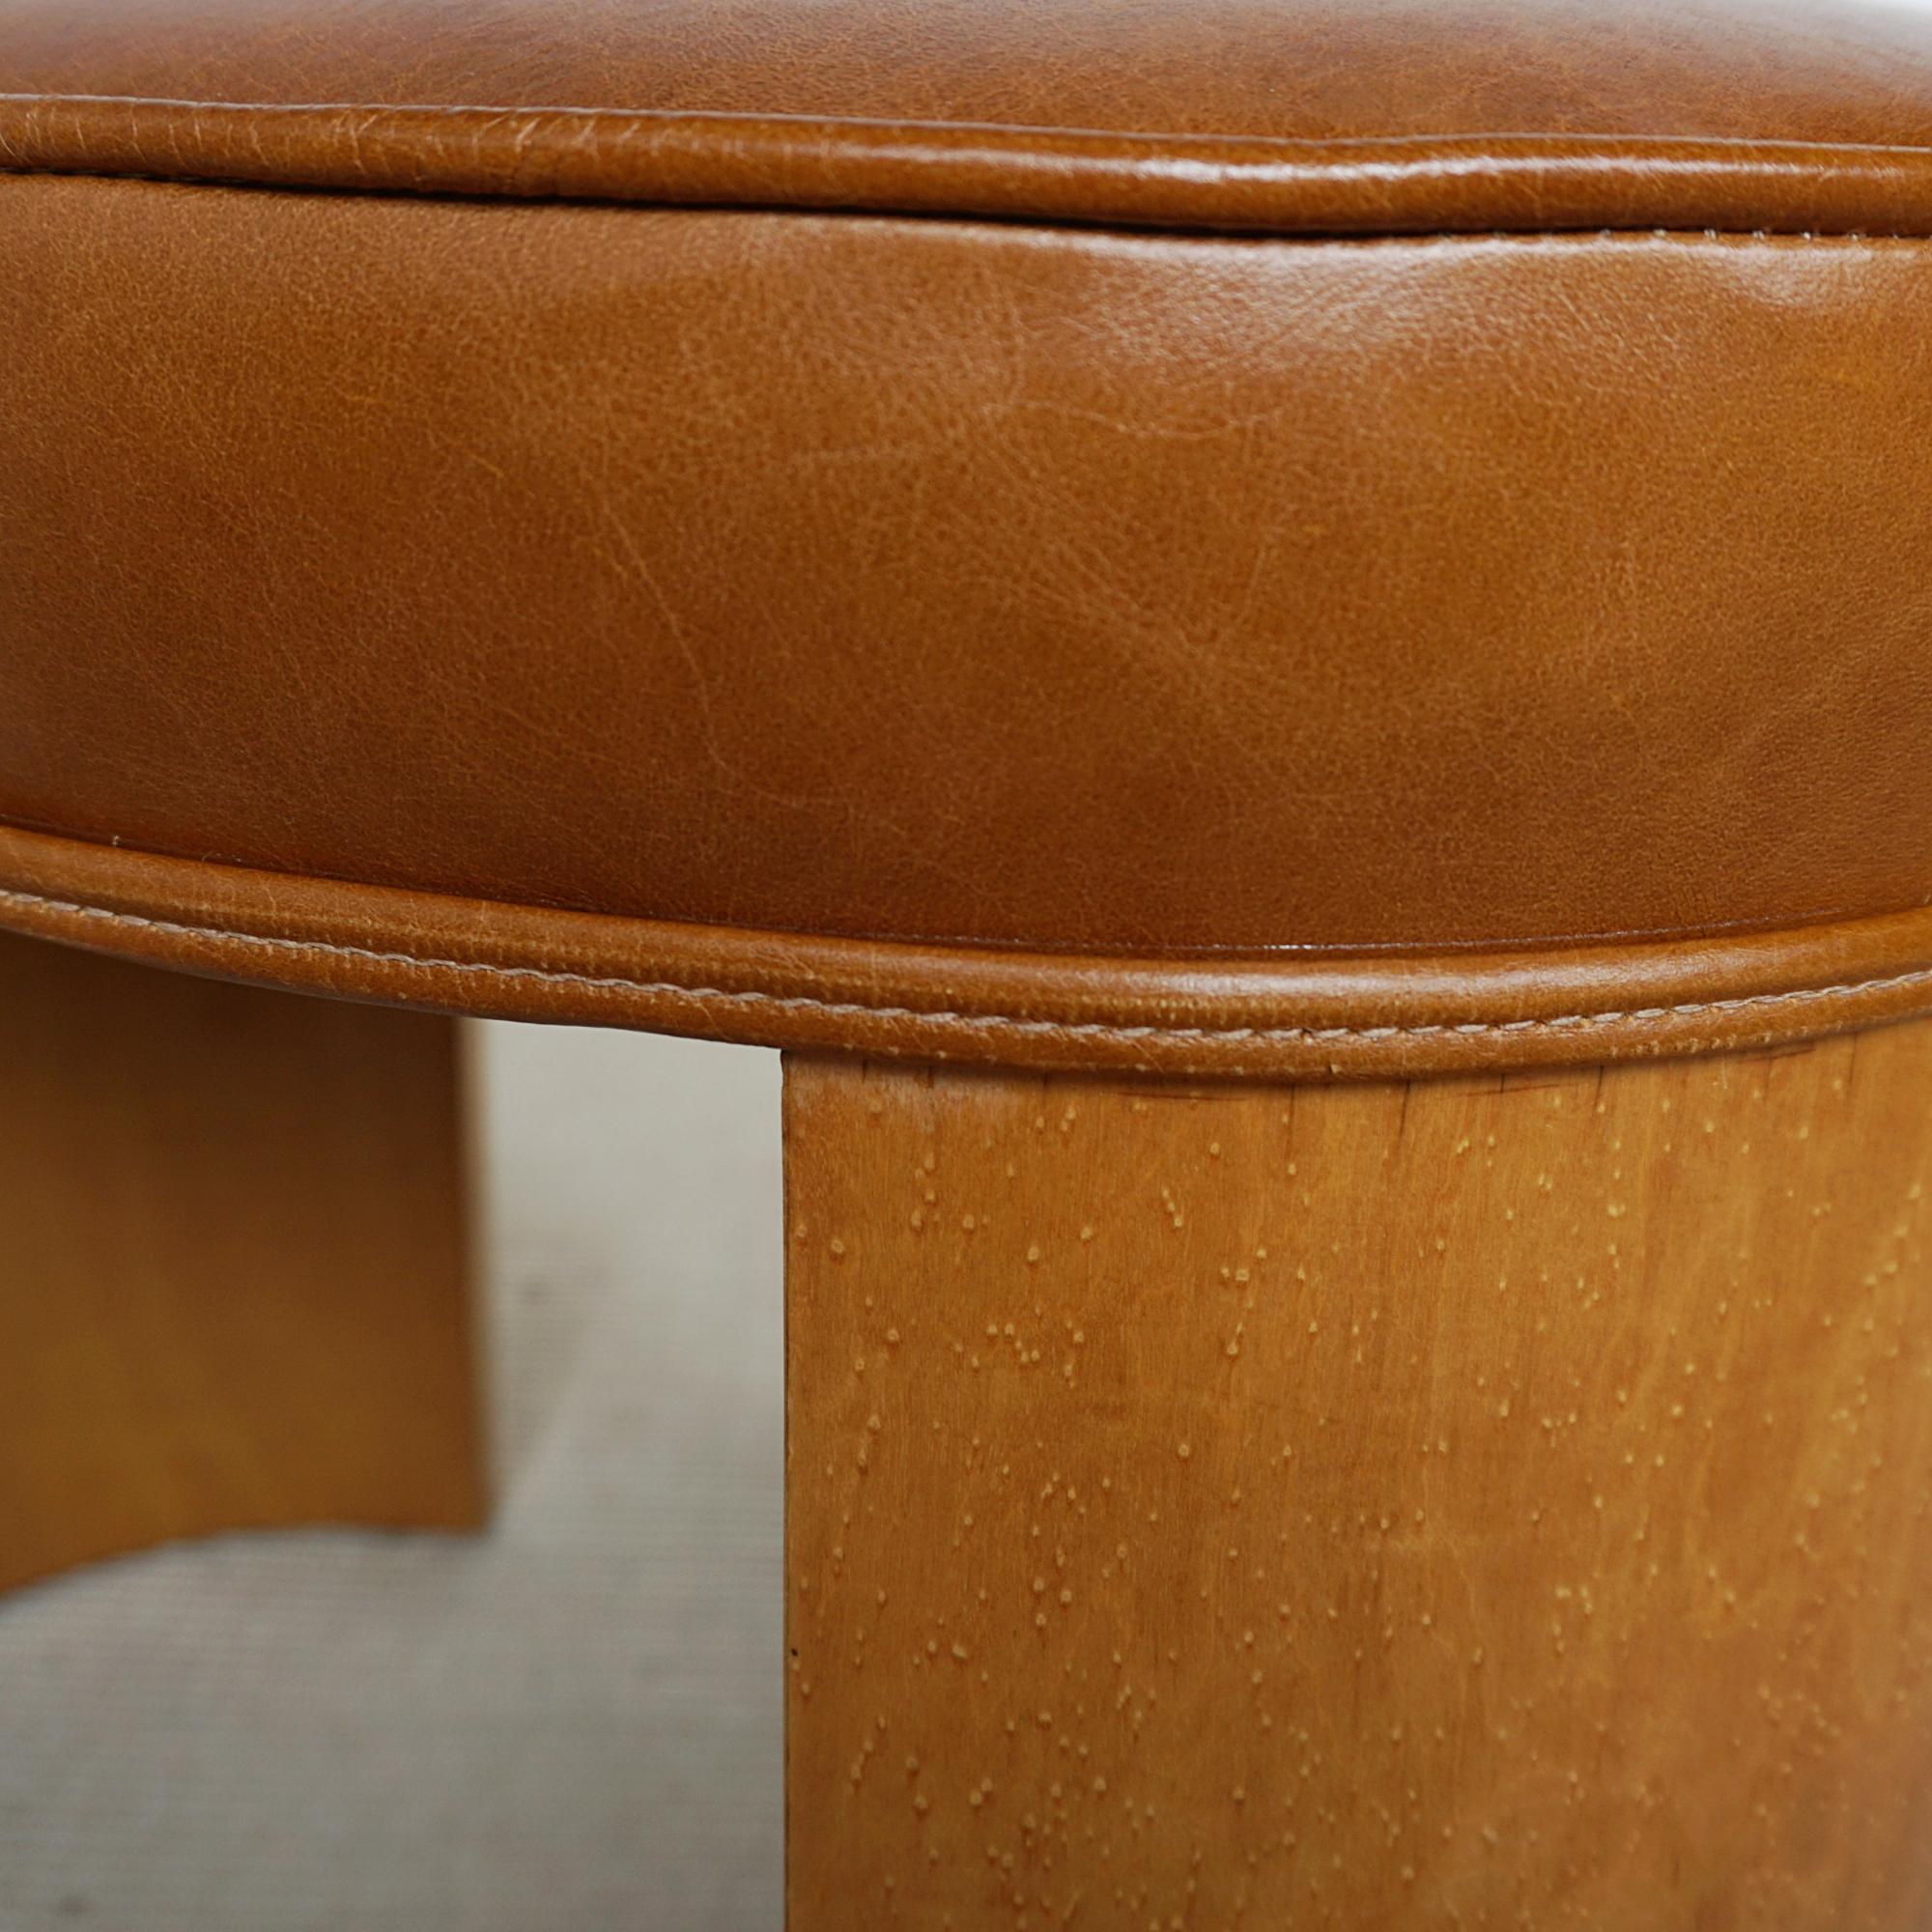 Art Deco Birdseye Maple Veneered Stool With Brown Leather Re-upholstery For Sale 3